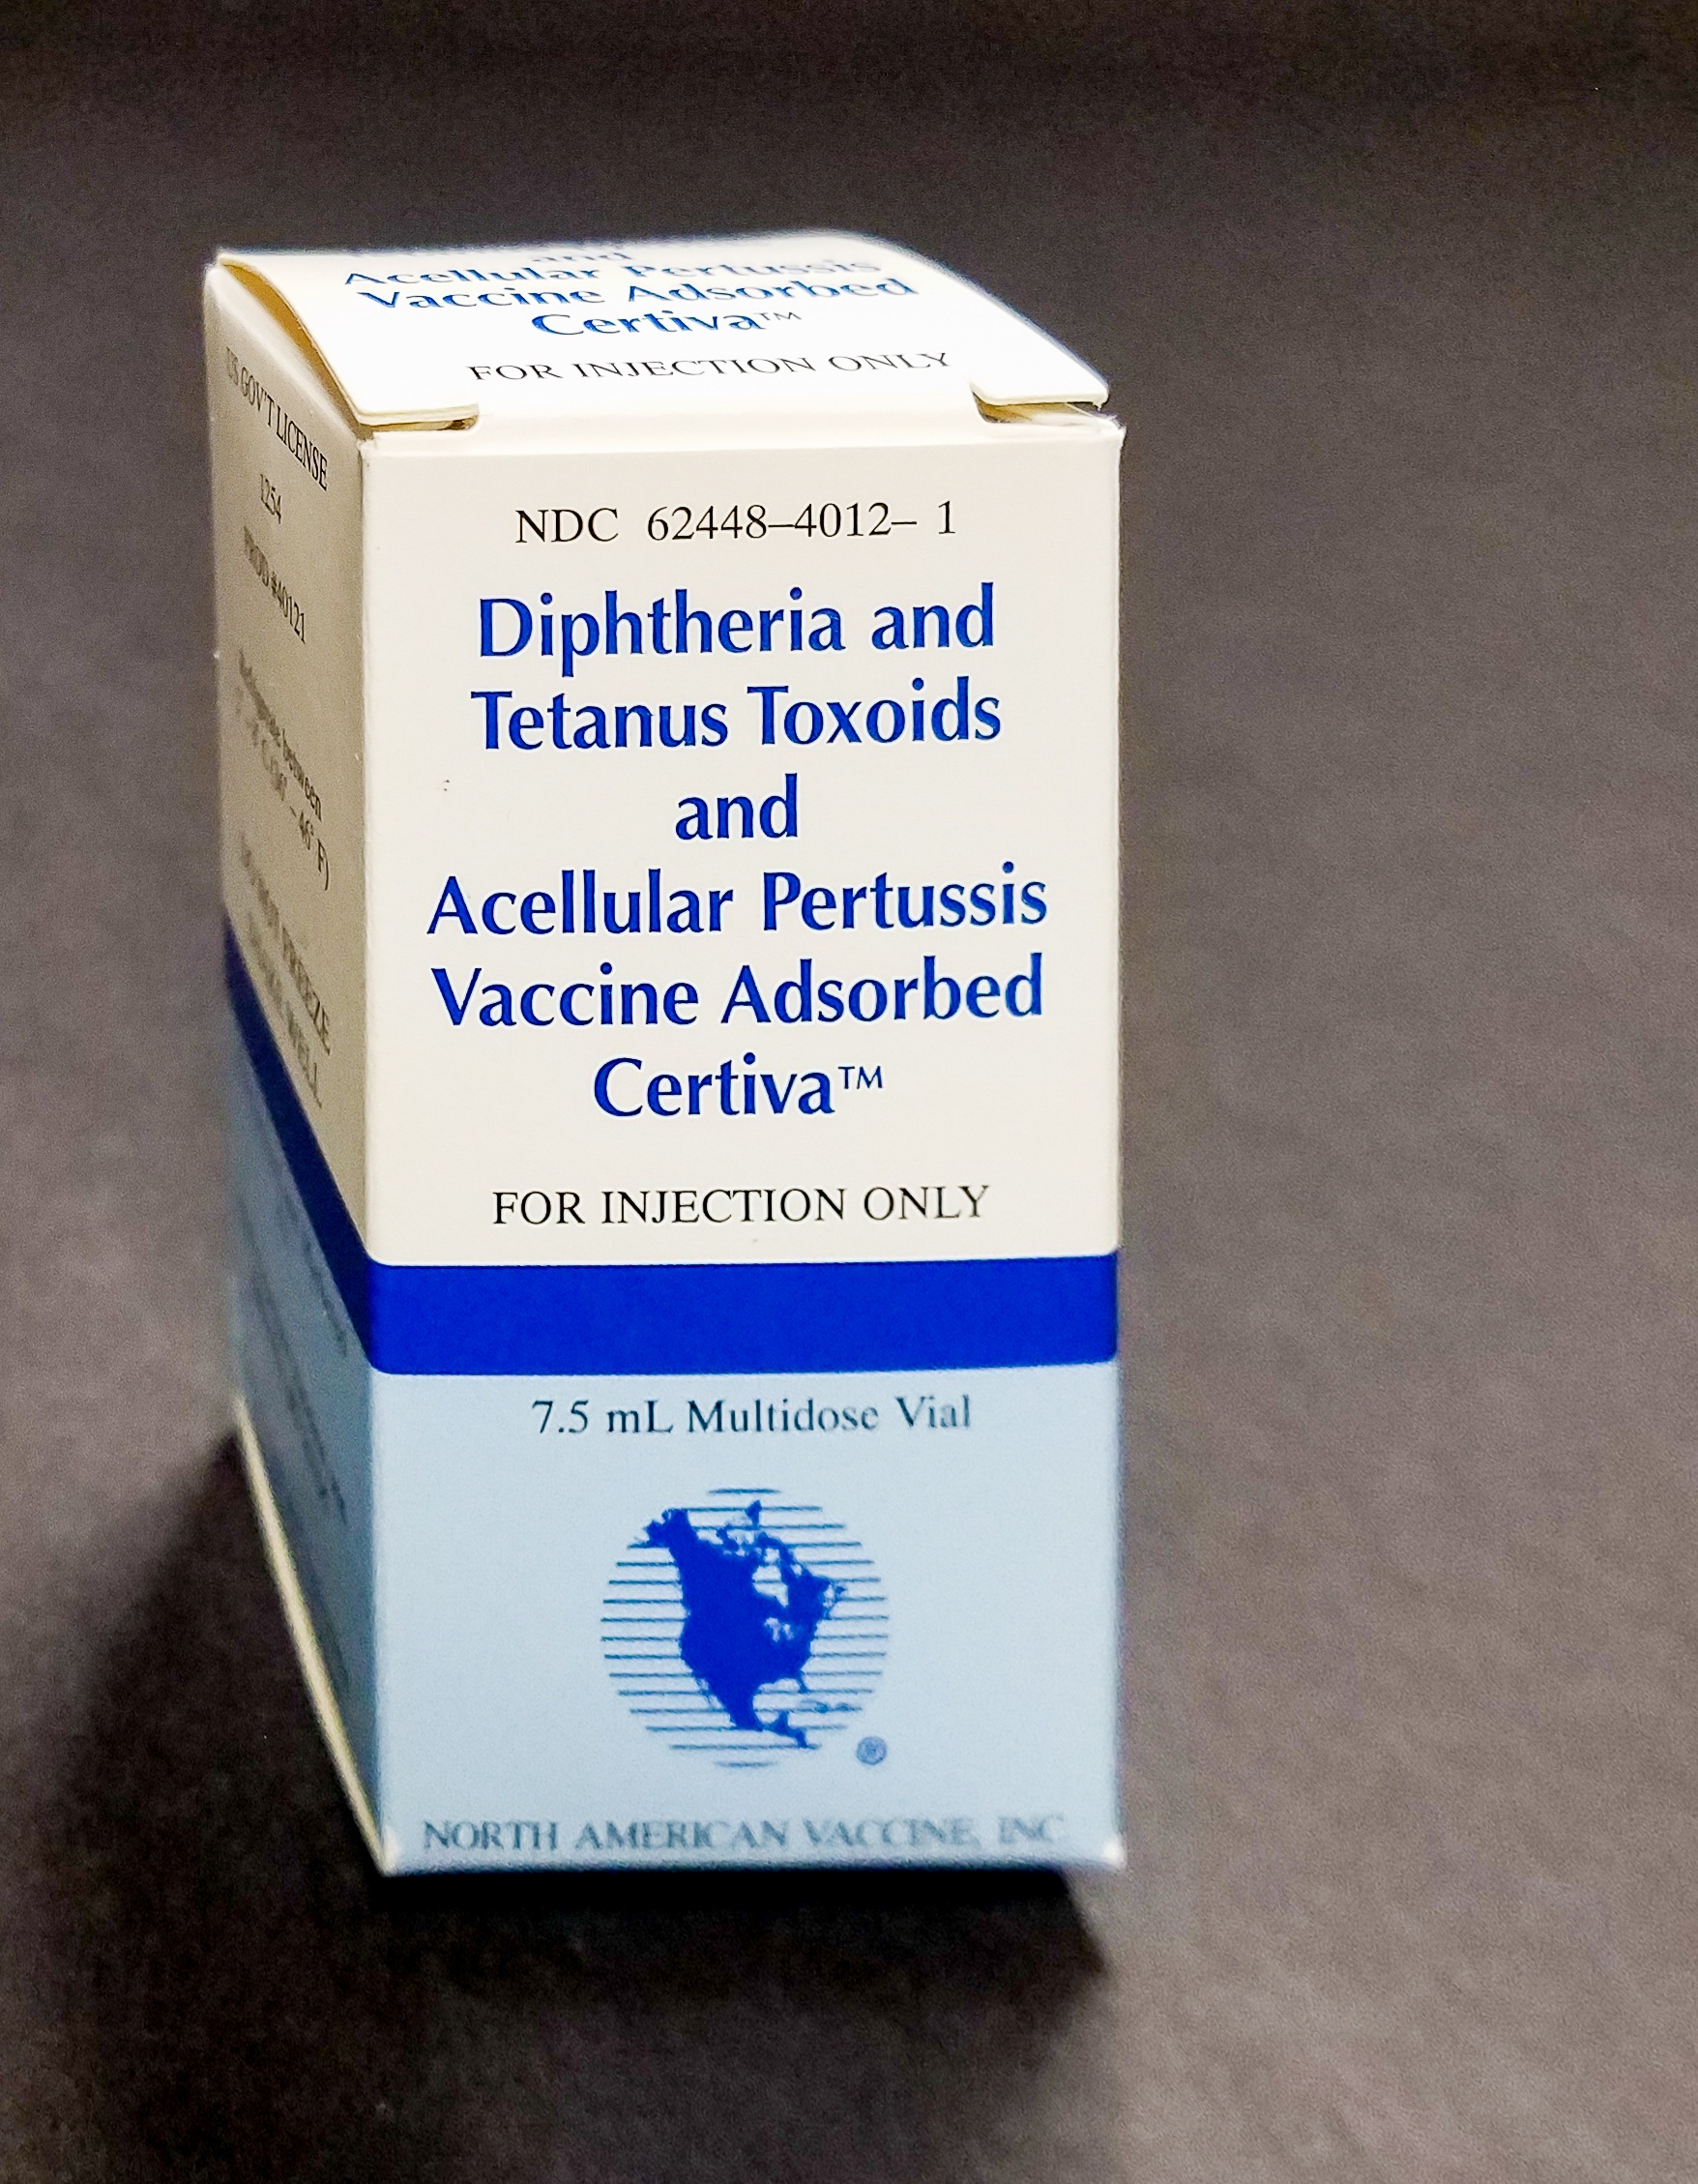 Image of a vaccine box  North American Vaccine, Inc. Diphtheria and Tetanus Toxoids and Acellular Pertussis Vaccine from 1990s. 